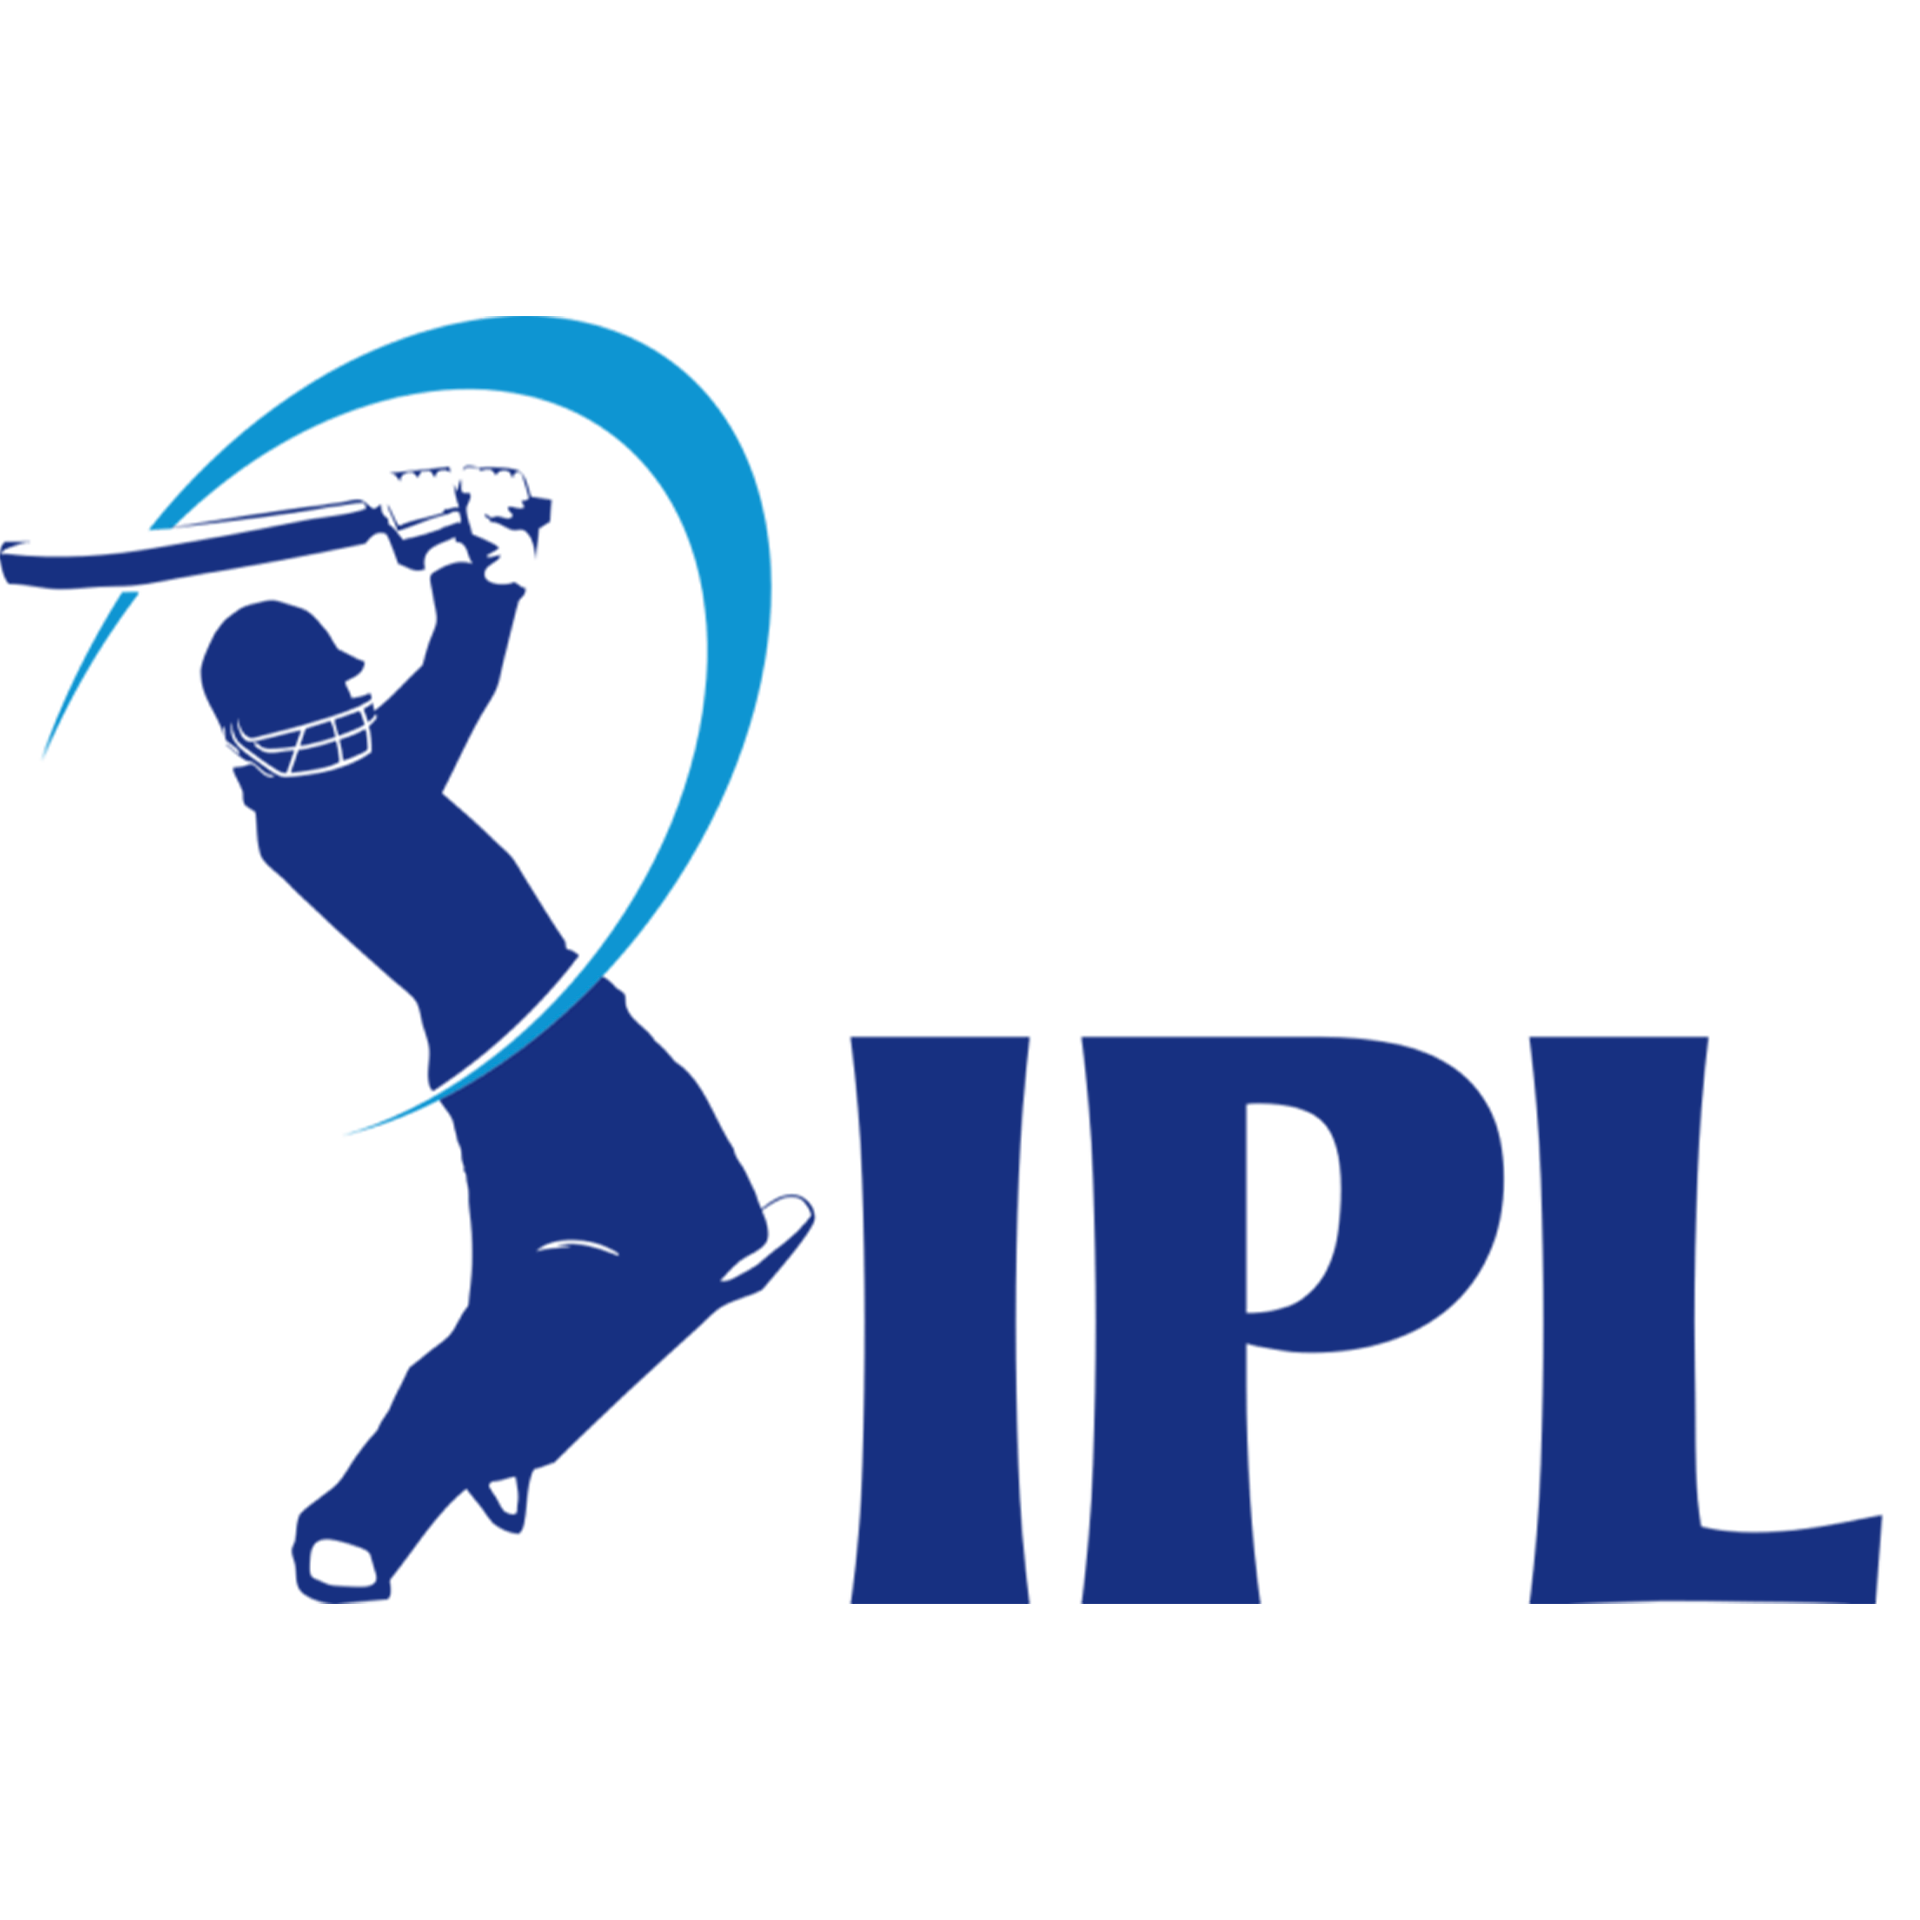 Choose one of the top 5 bookmakers to bet on the IPL.